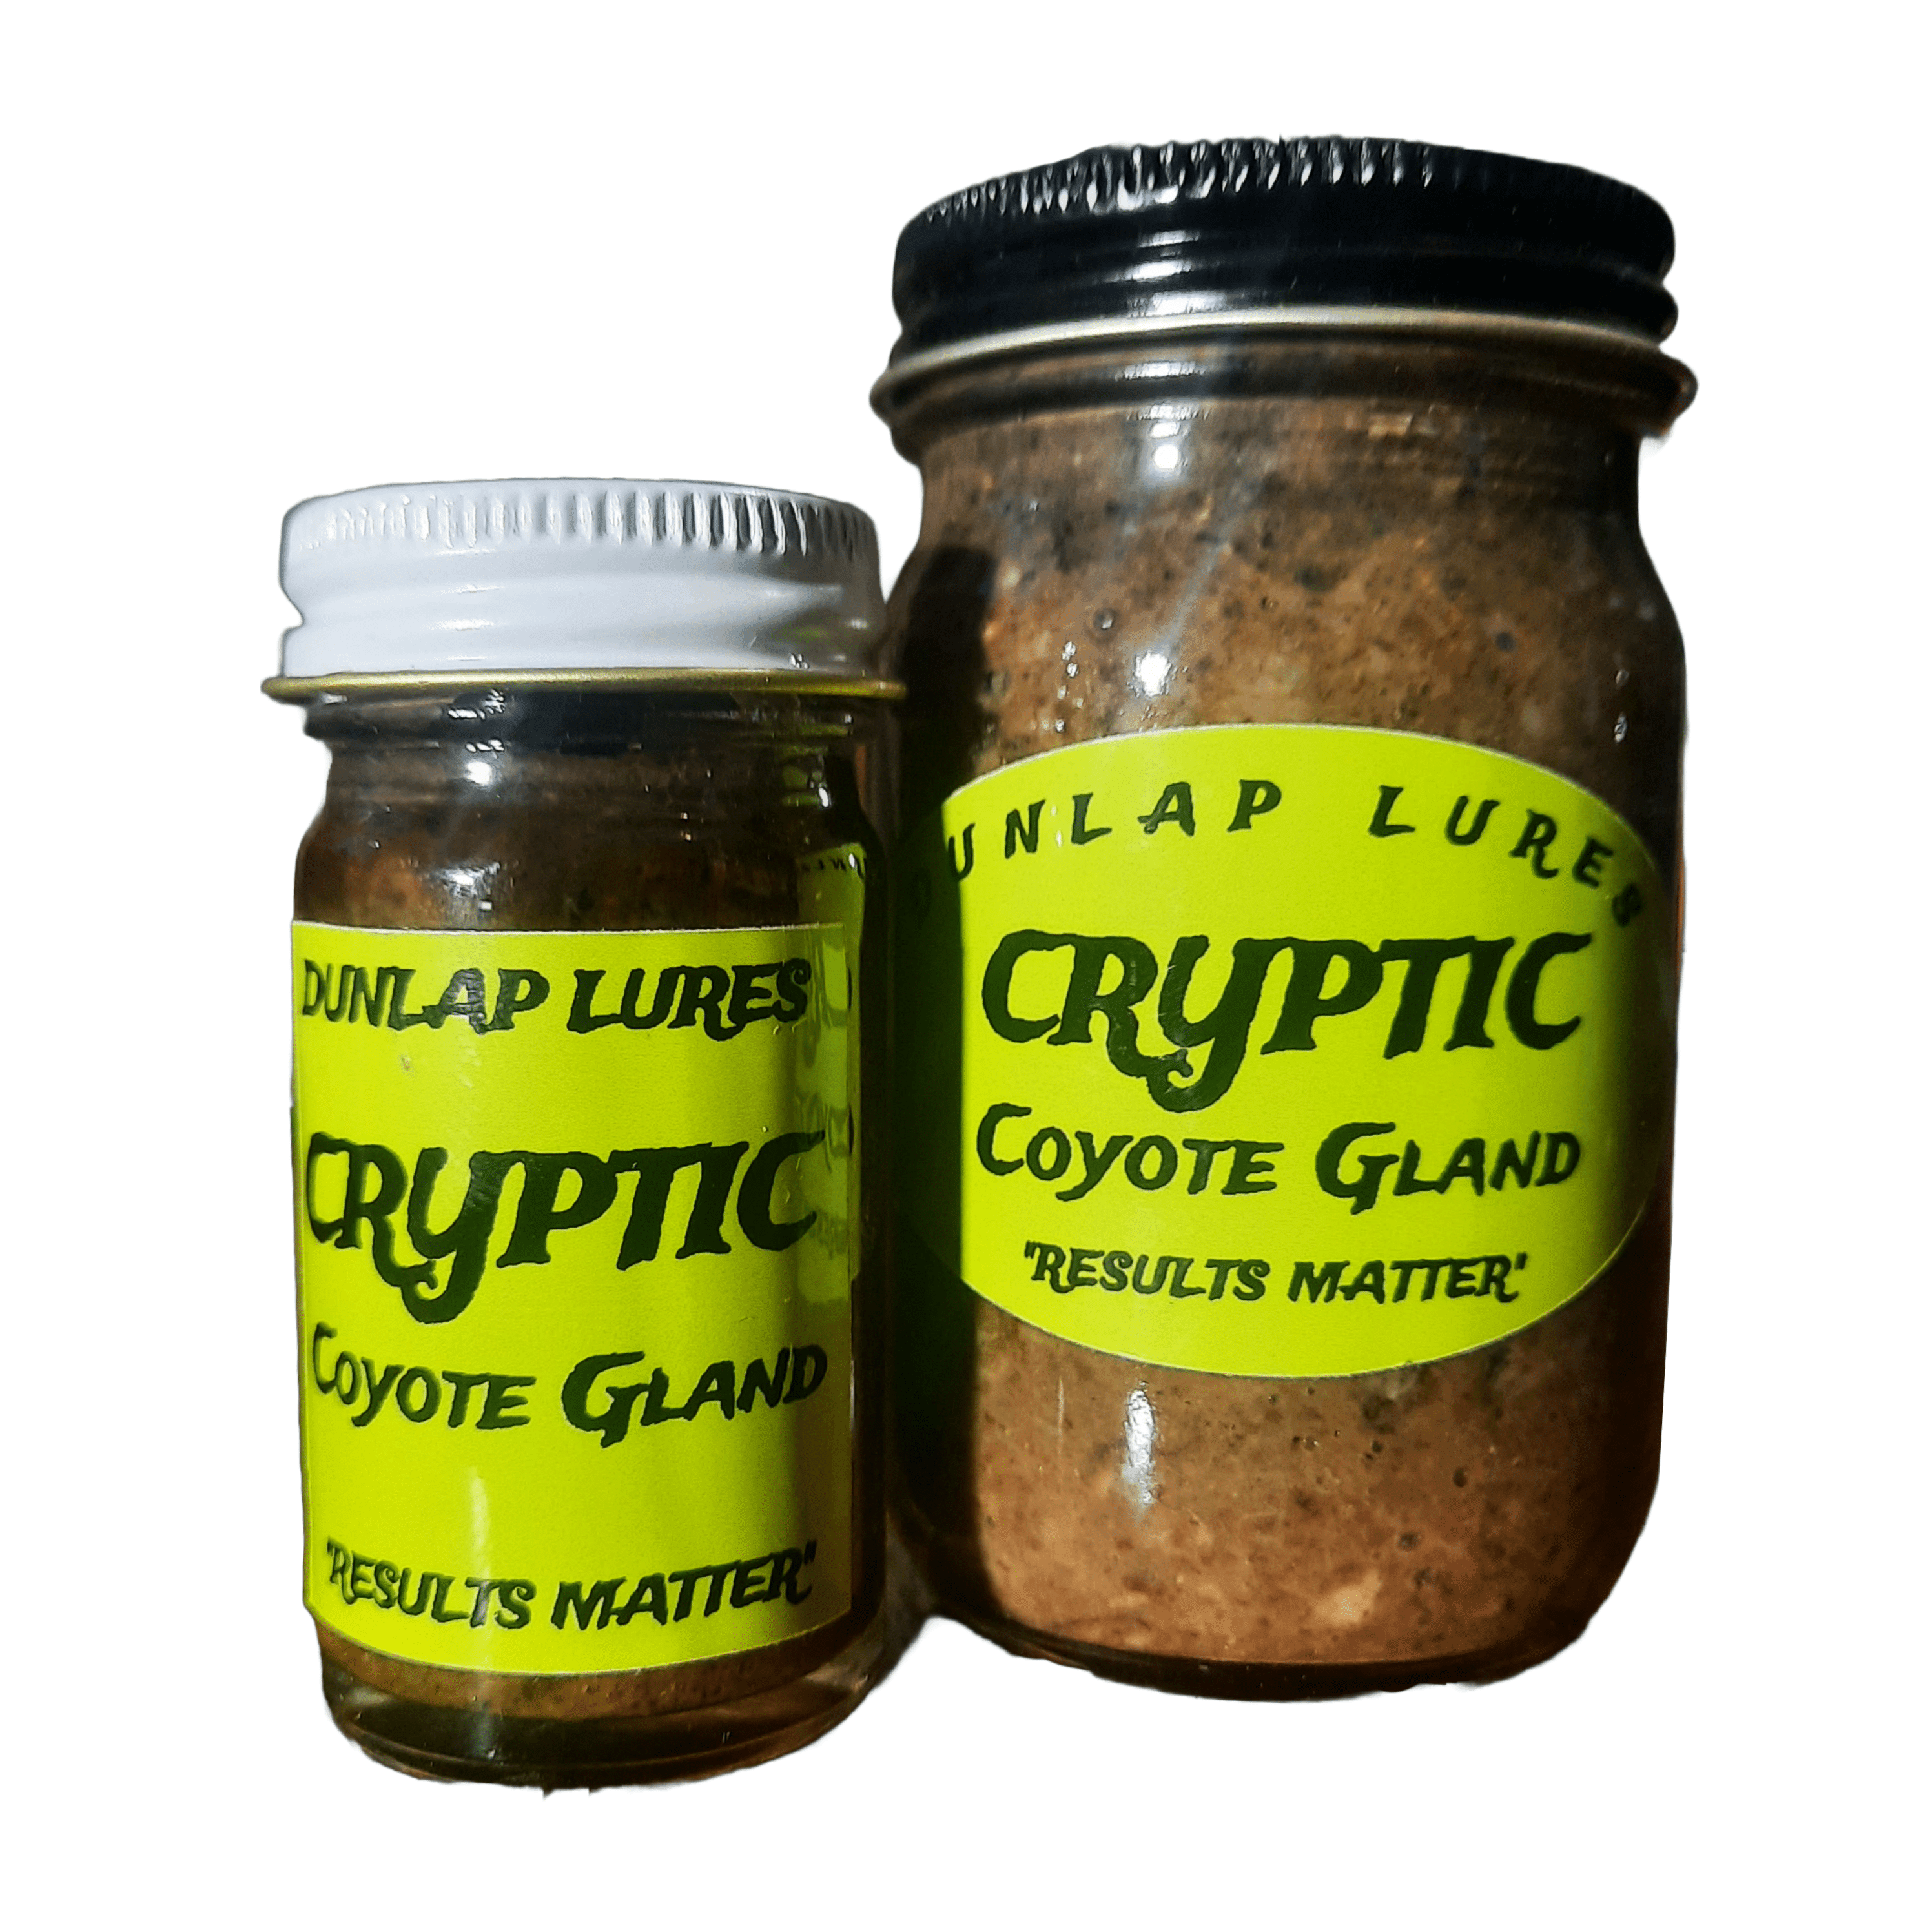 Dunlap's Cryptic Coyote Gland Lure - Trapping Supplies